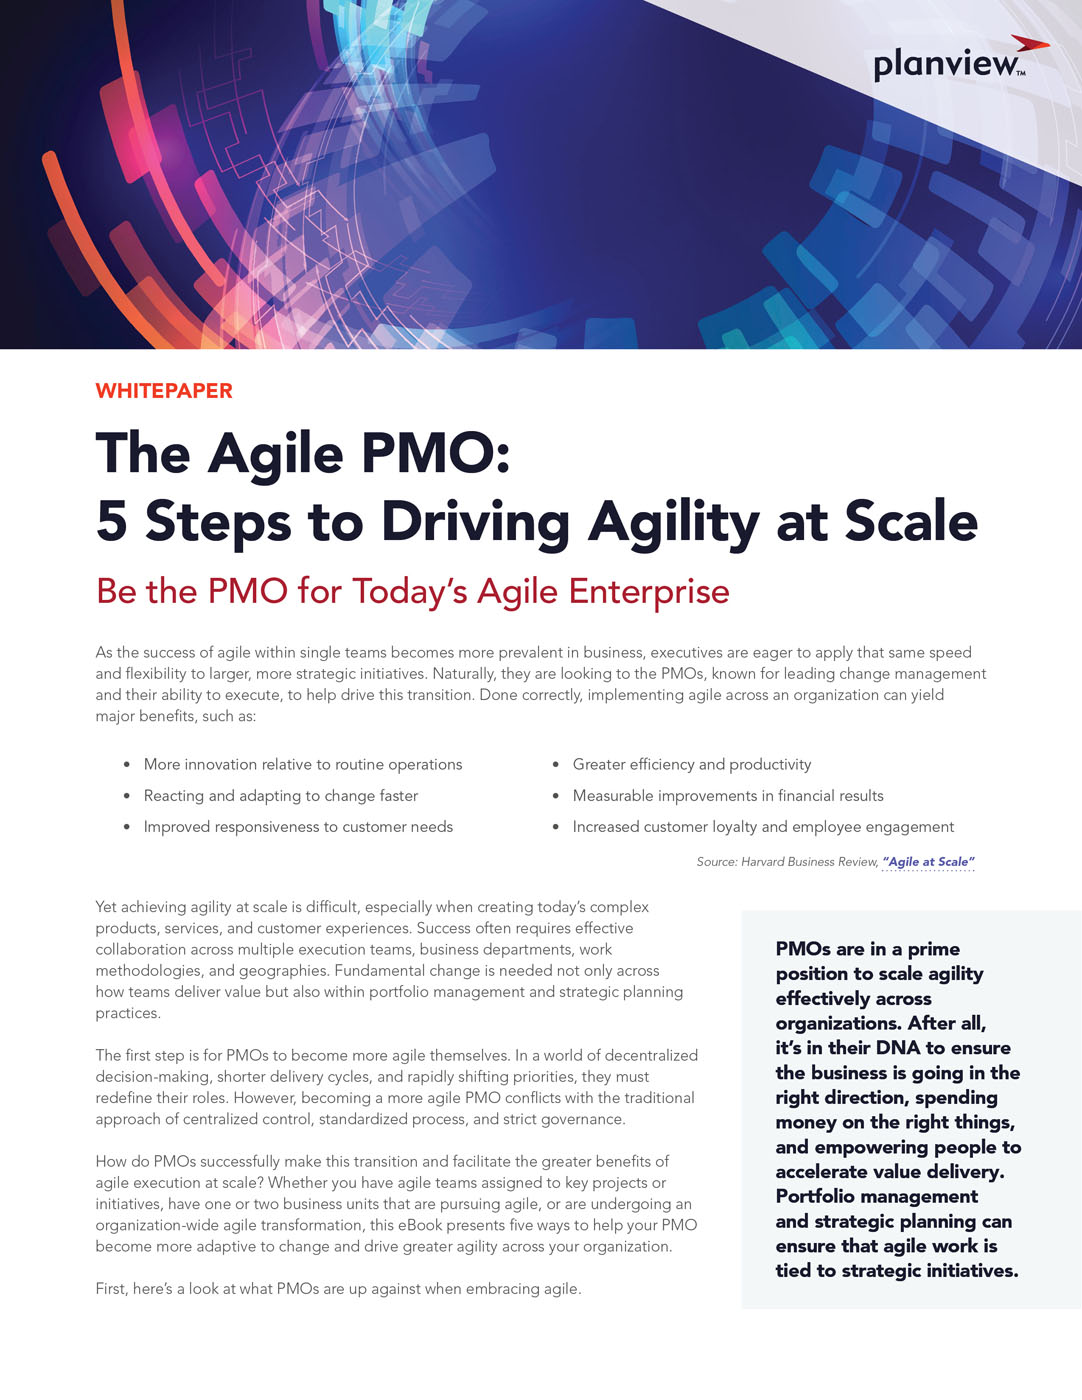 The Agile PMO: 5 Steps to Driving Agility at Scale